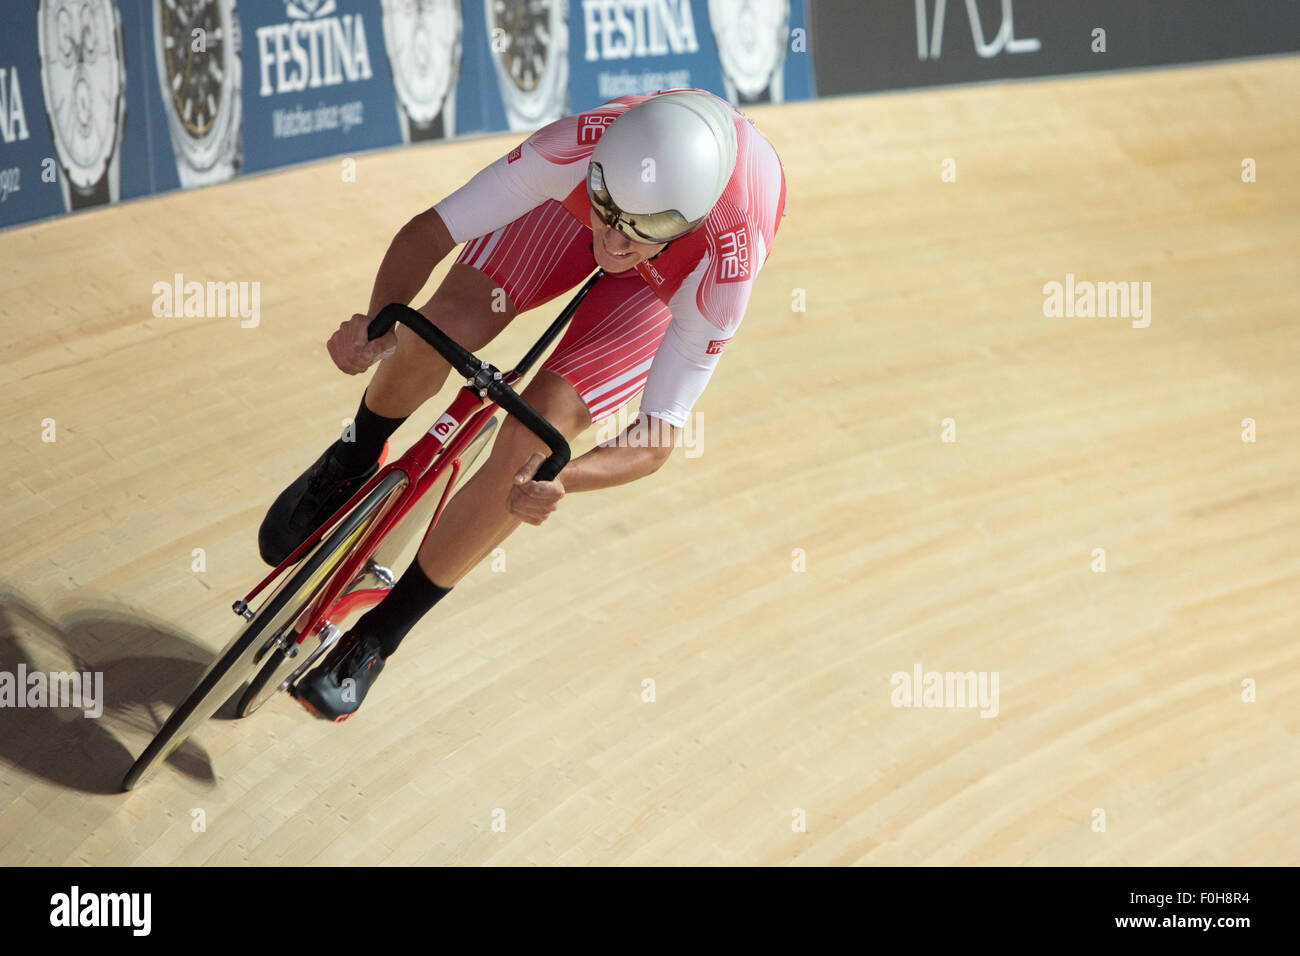 Derby, UK. 16th Aug, 2015. Chris Latham competes in the flying lap time trial, part of the omnium event at the Revolution Series at Derby Arena, Derby, United Kingdom on 16 August 2015. The Revolution Series is a professional track racing series featuring many of the world's best track cyclists. This event, taking place over 3 days from 14-16 August 2015, is an important preparation event for the Rio 2016 Olympic Games, allowing British riders to score qualifying points for the Games. Credit:  Andrew Peat/Alamy Live News Stock Photo